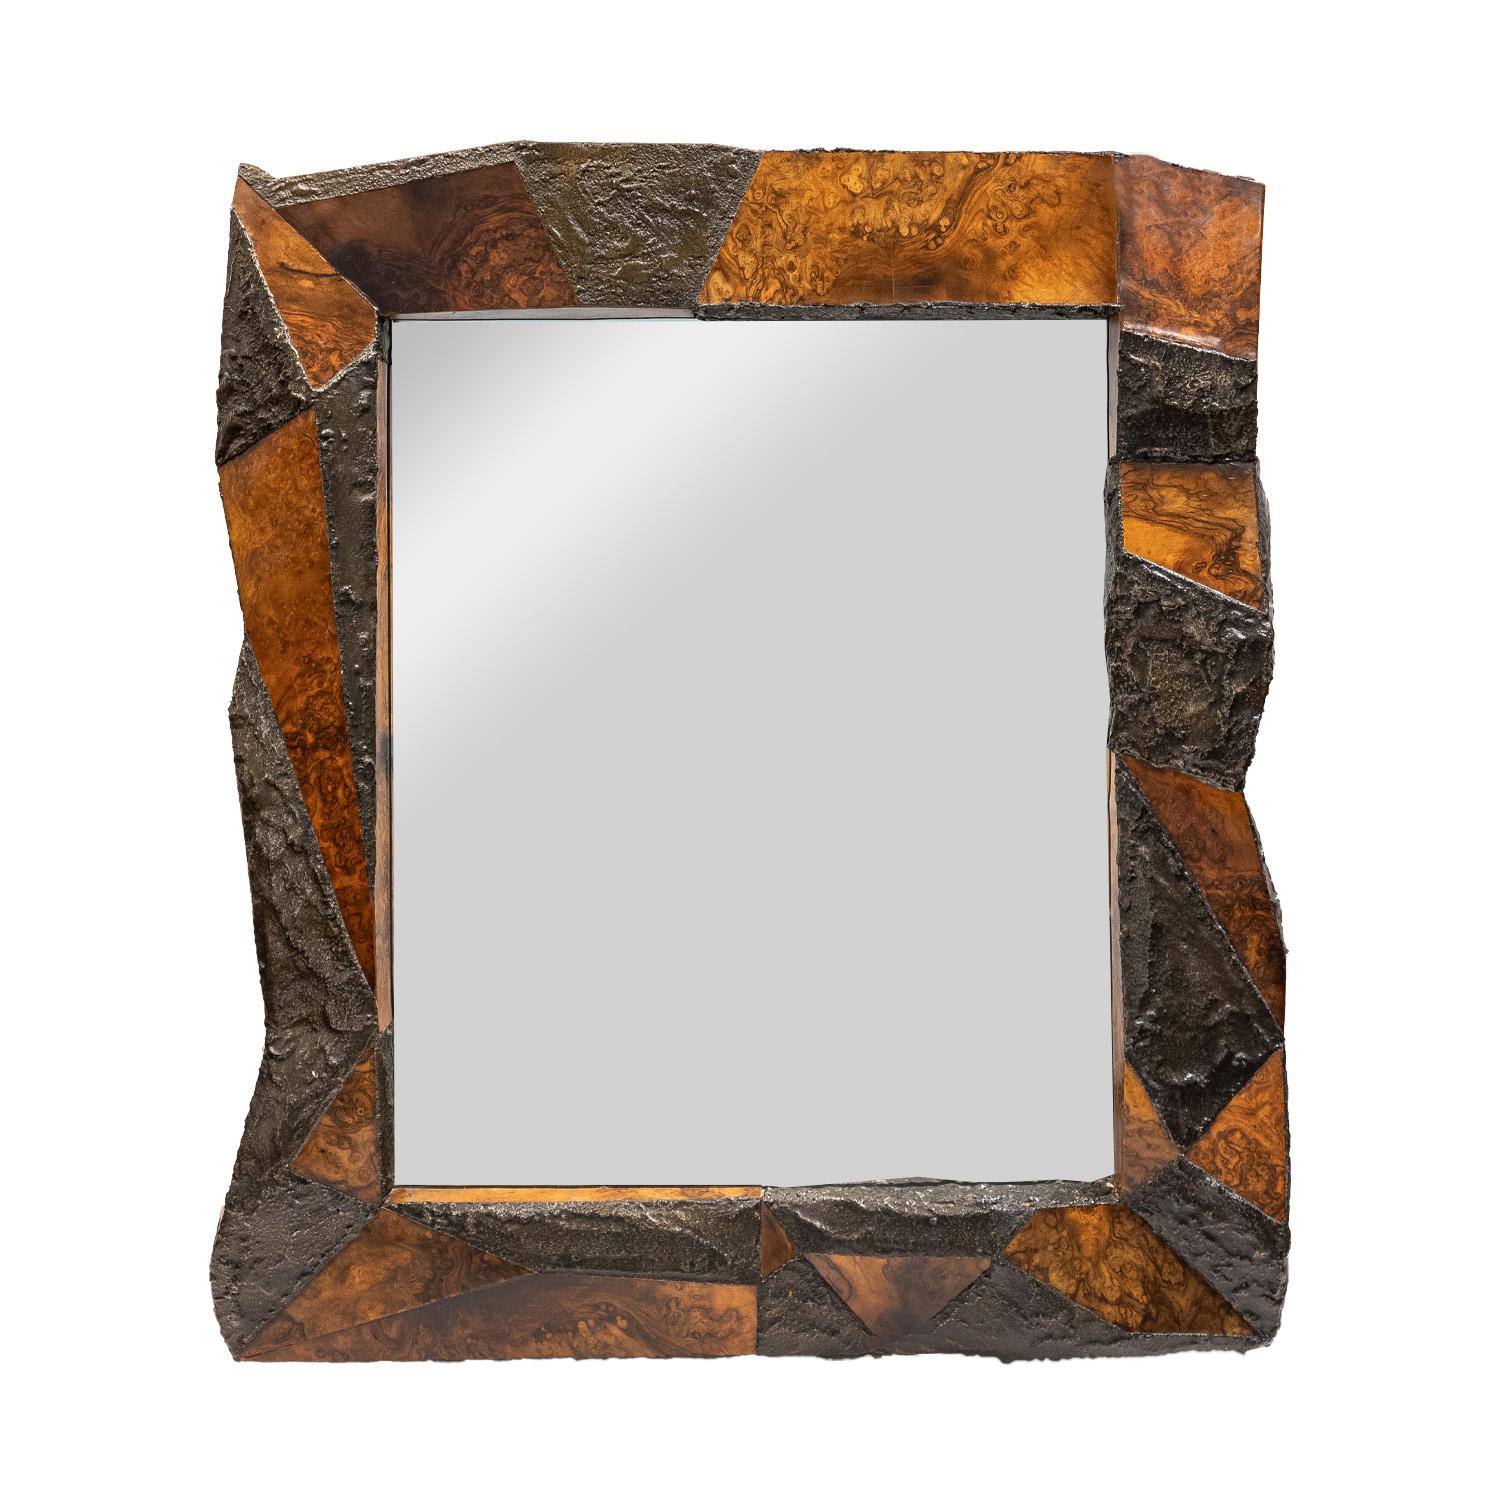 Rare and unique sculptured  mirror in bronze resin and walnut burl by Paul Evans, American 1975. Comes with original cleat marked “PE - 908.” We have not seen any other mirror like this one. The original owner purchased this with a wall-mount Paul